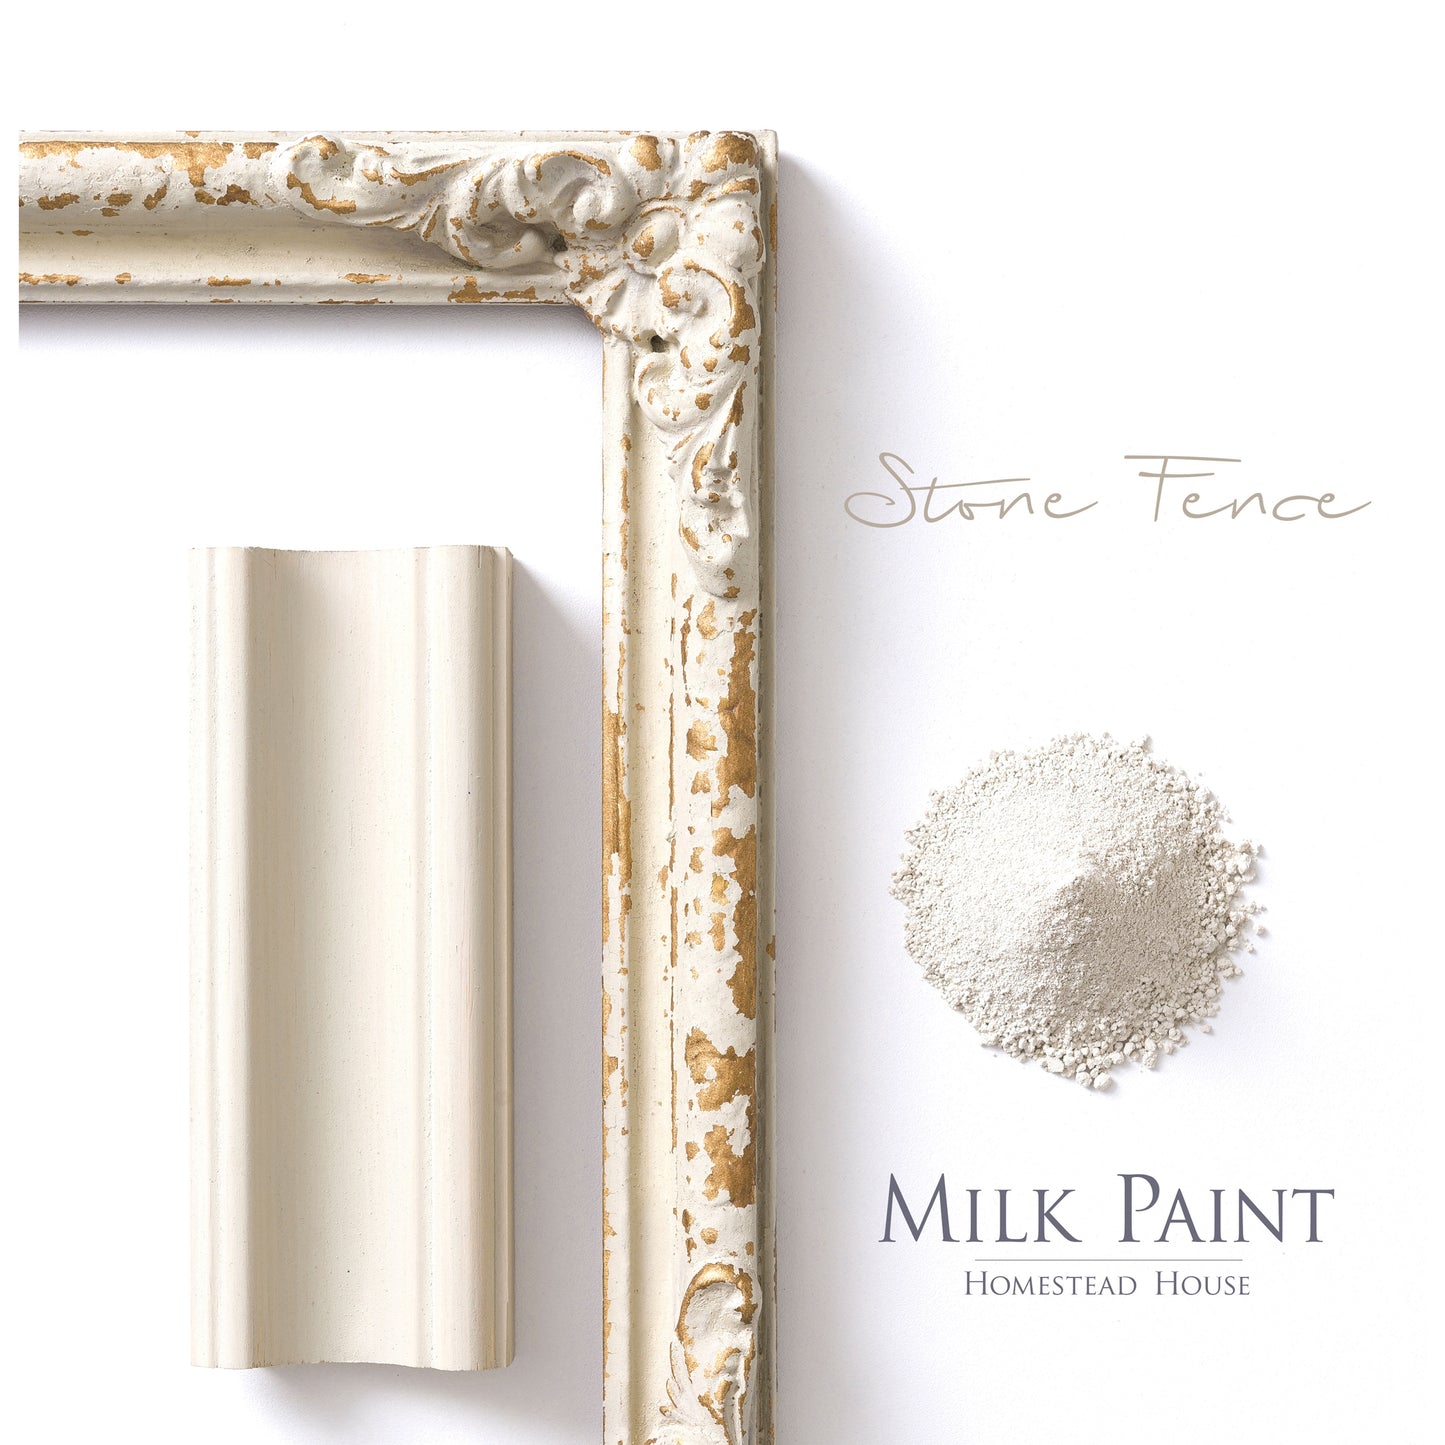 Milk Paint from Homestead House in Stone Fence, A light neutral with a muted green undertone.  |  homesteadhouse.ca